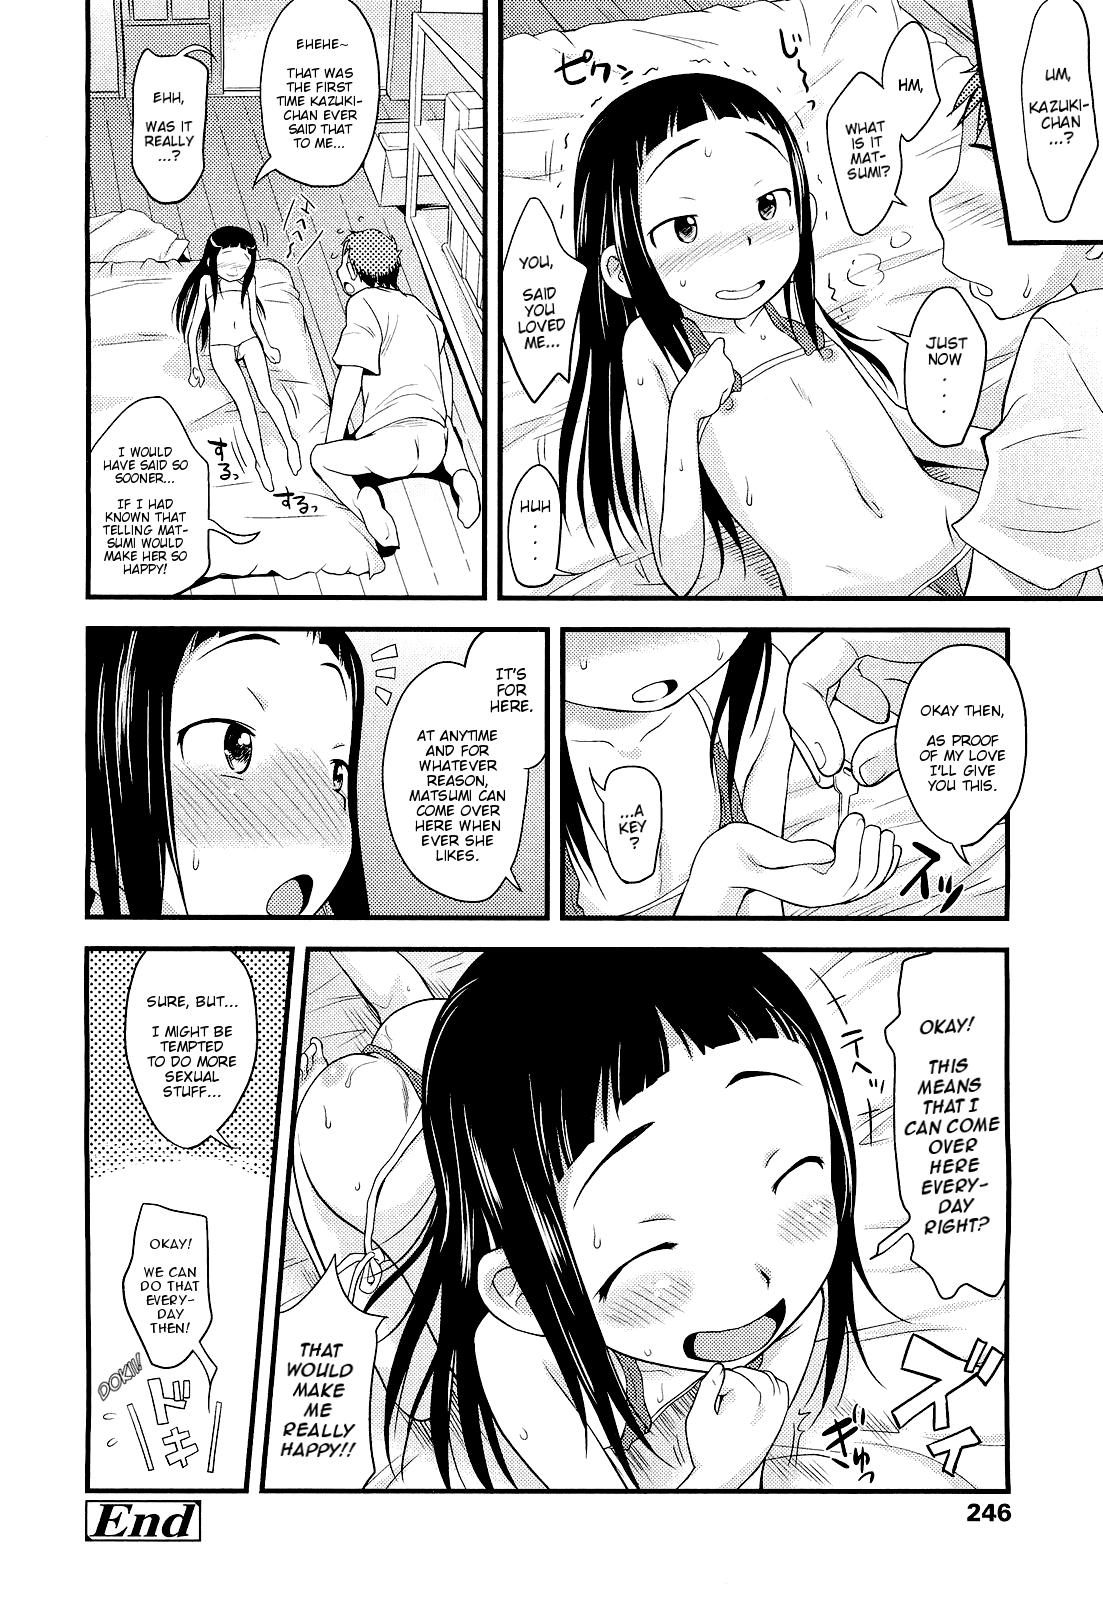 [Nohri Isawa] Futari no Tokubetsu nao Heya (A Special Room for Two people) [ENG] [Mistvern] page 22 full